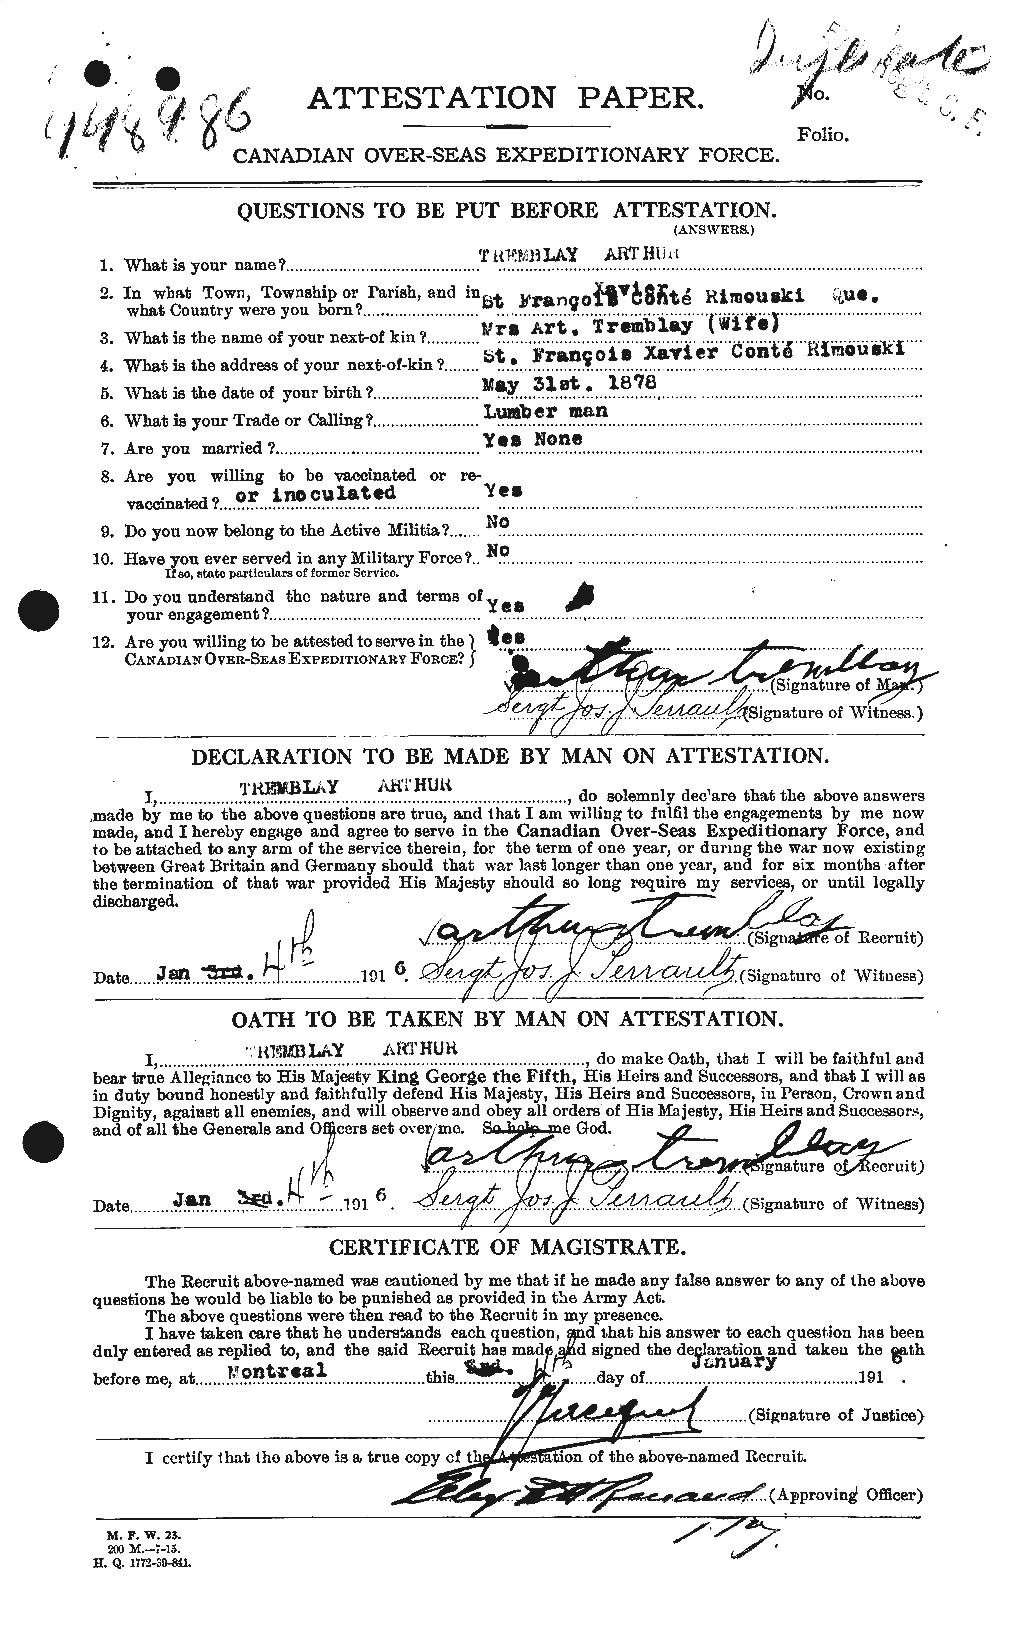 Personnel Records of the First World War - CEF 638966a